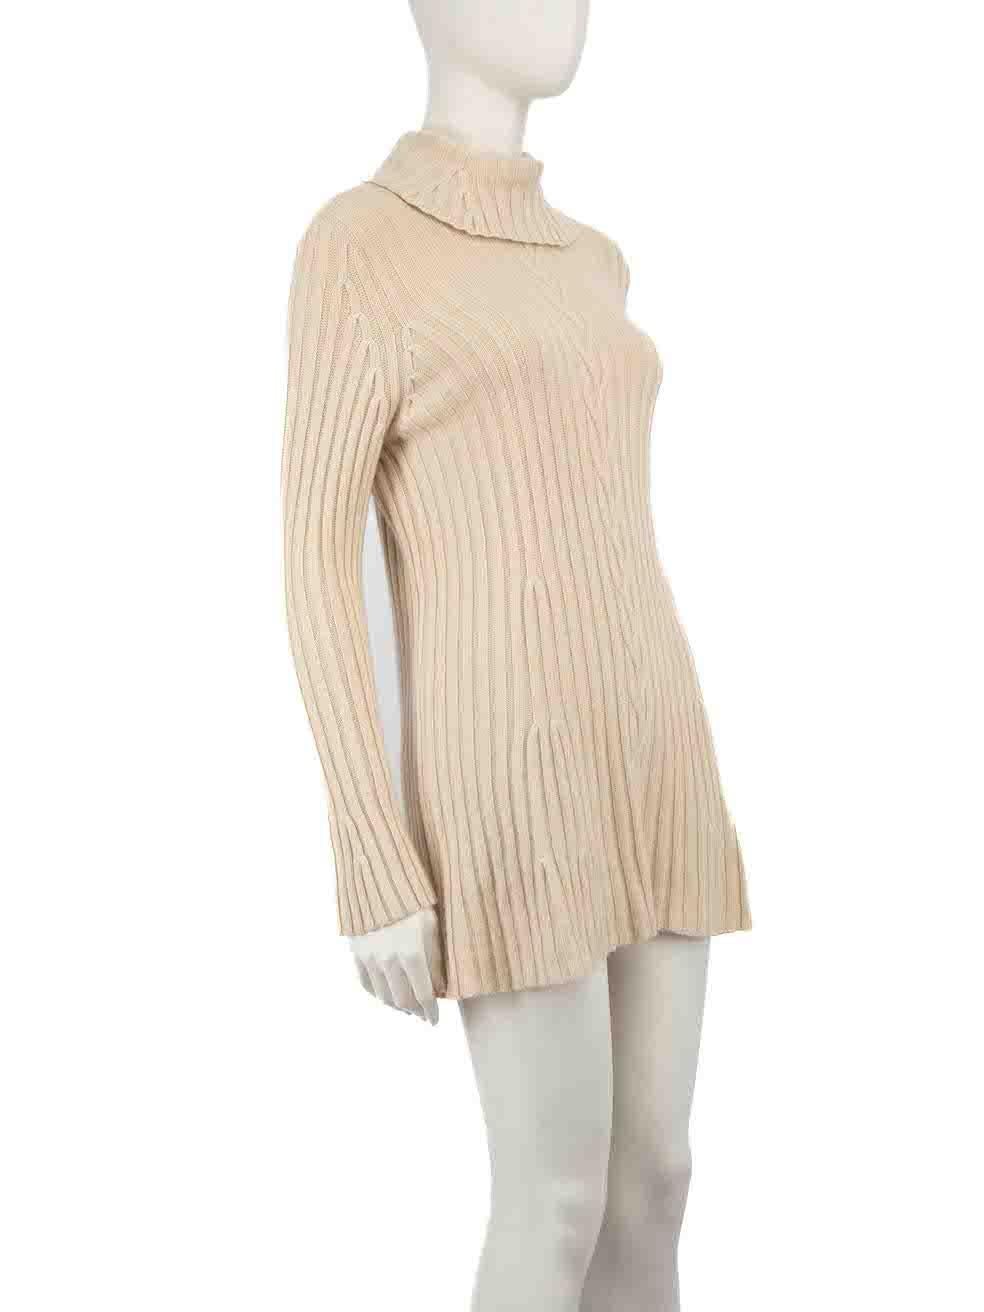 CONDITION is Very good. Hardly any visible wear to dress is evident on this used Escada designer resale item.
 
 
 
 Details
 
 
 Beige
 
 Silk
 
 Knit dress
 
 Turtleneck
 
 Long sleeves
 
 Mini
 
 Stretchy
 
 
 
 
 
 Made in Italy
 
 
 
